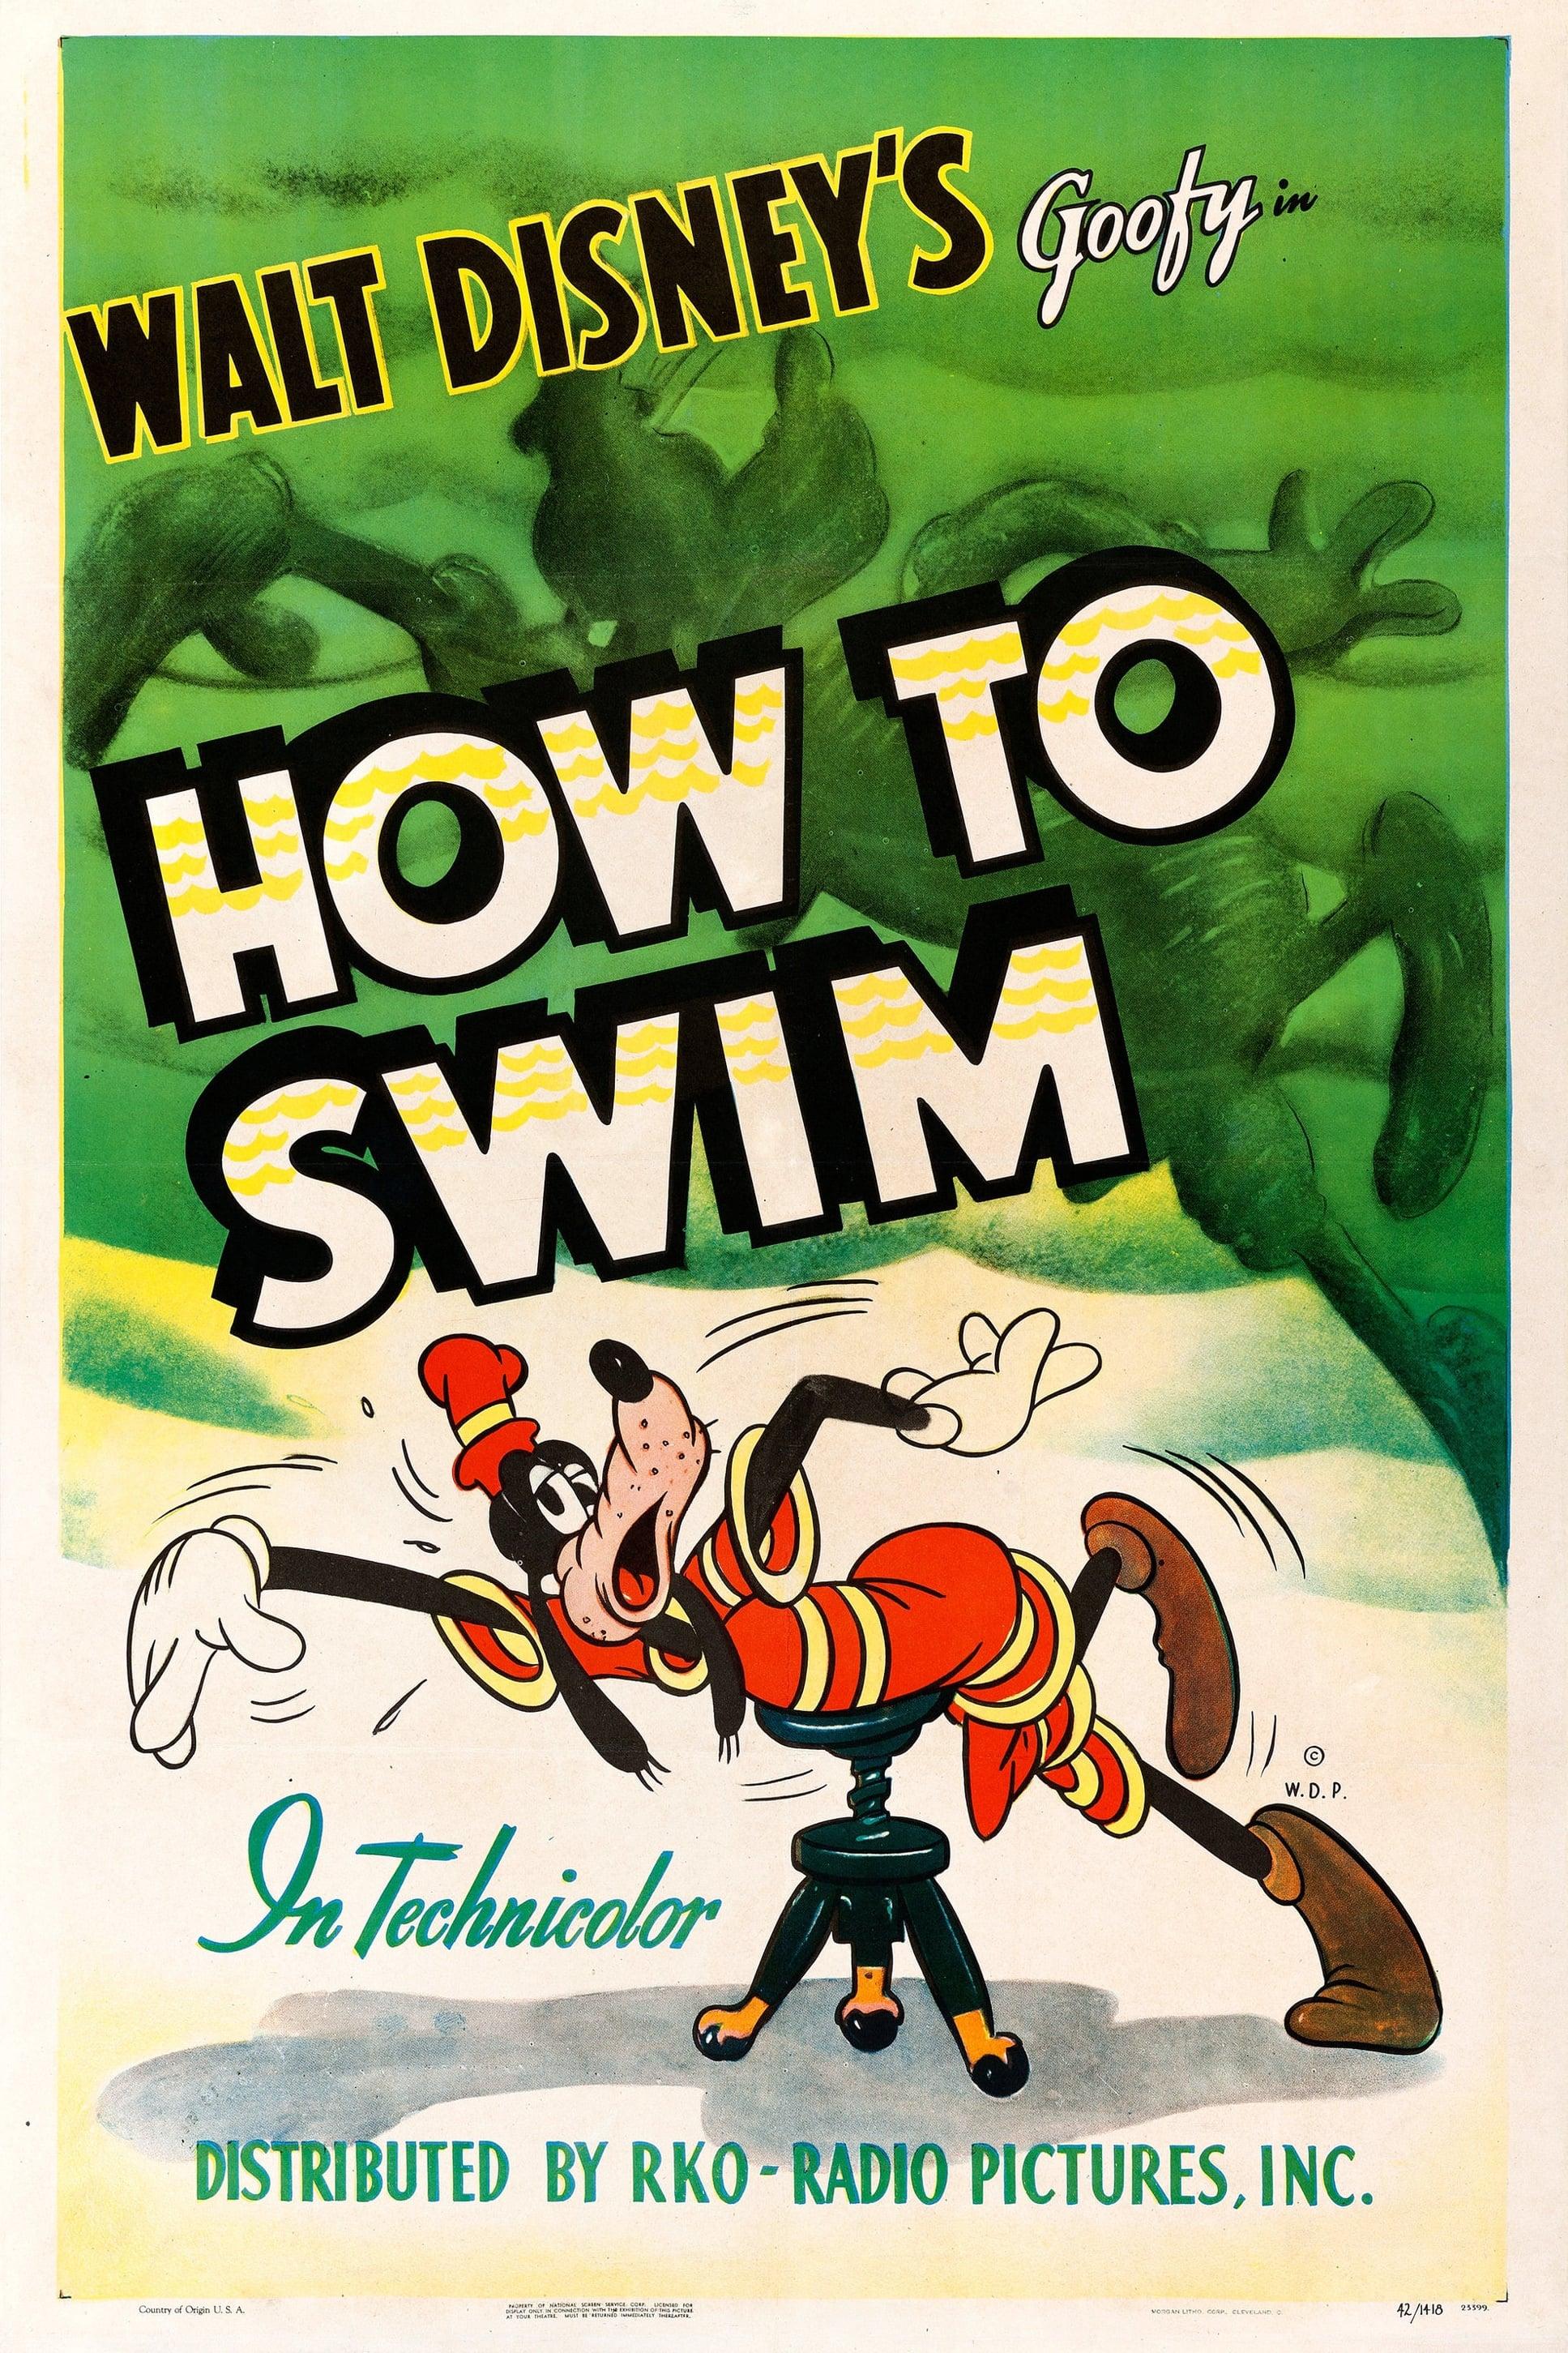 How to Swim poster